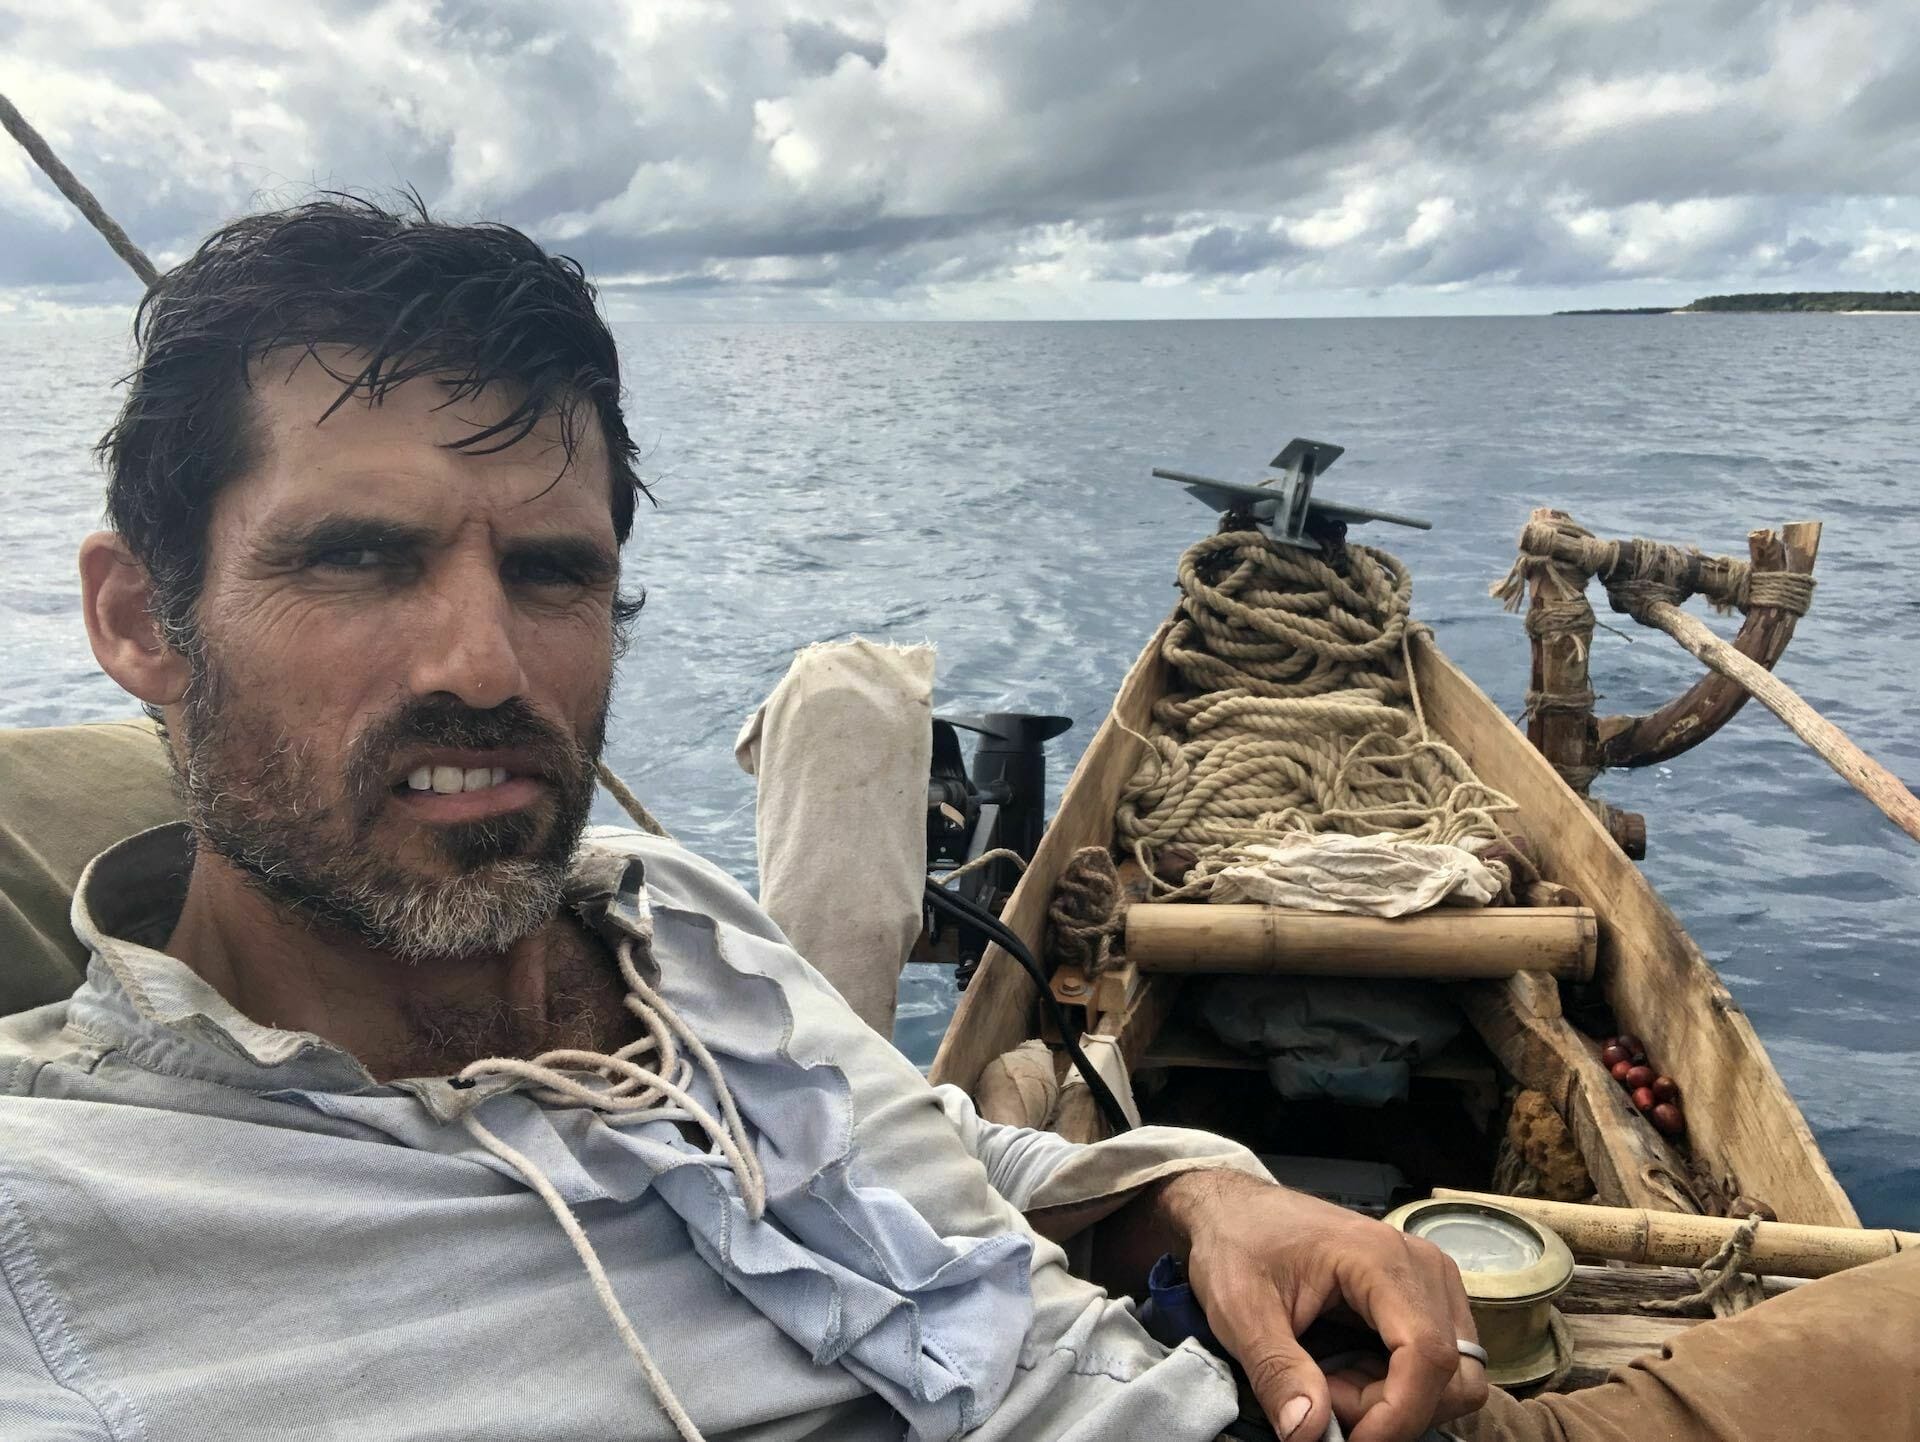 Outback Mike is Sailing a Dugout Canoe Through The Great Barrier